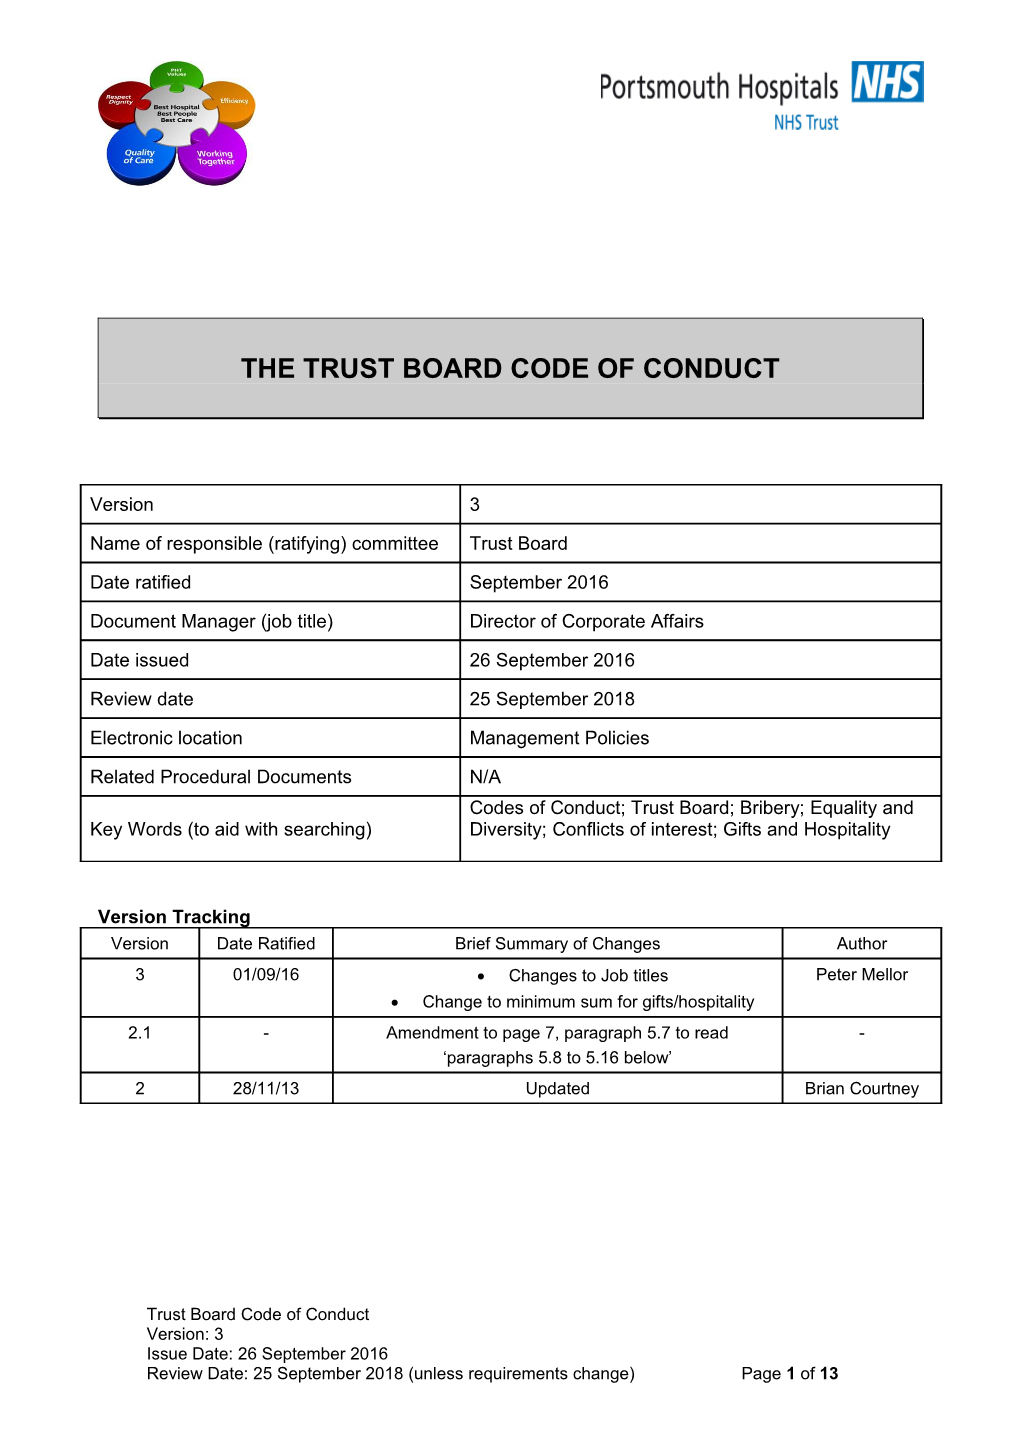 The Trust Board Code of Conduct